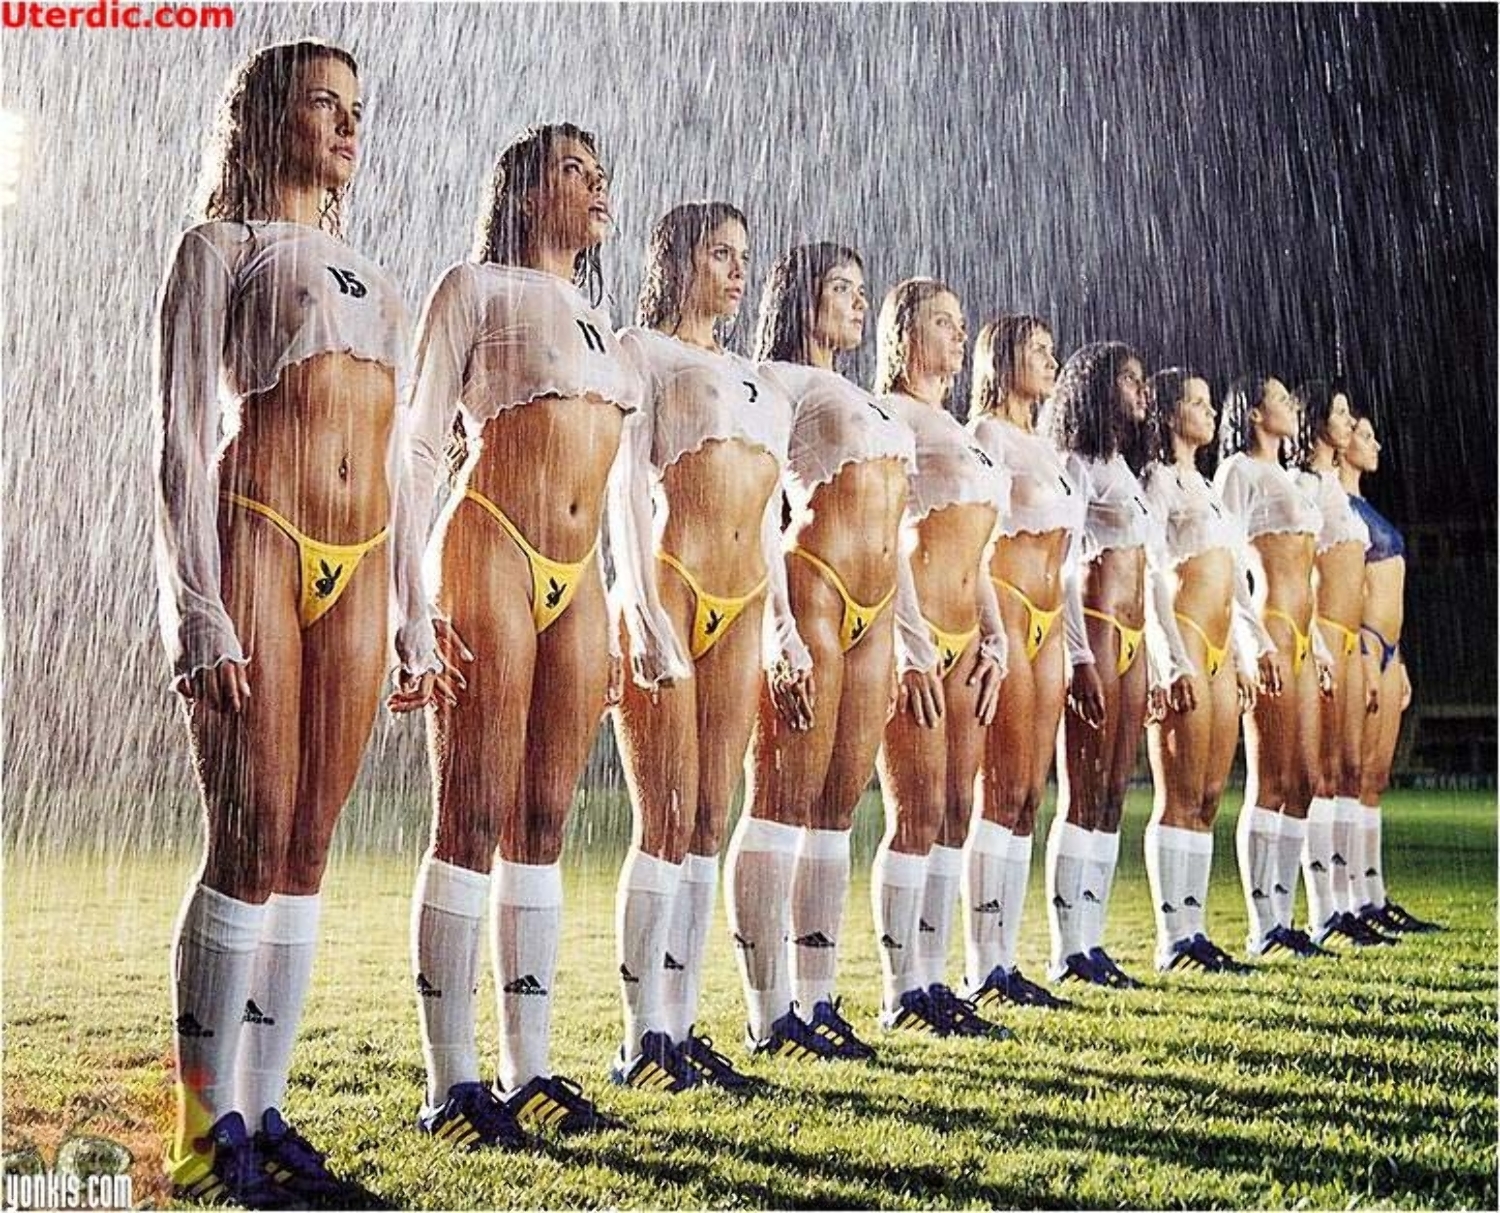 Hot girl soccer players nude-porn pictures